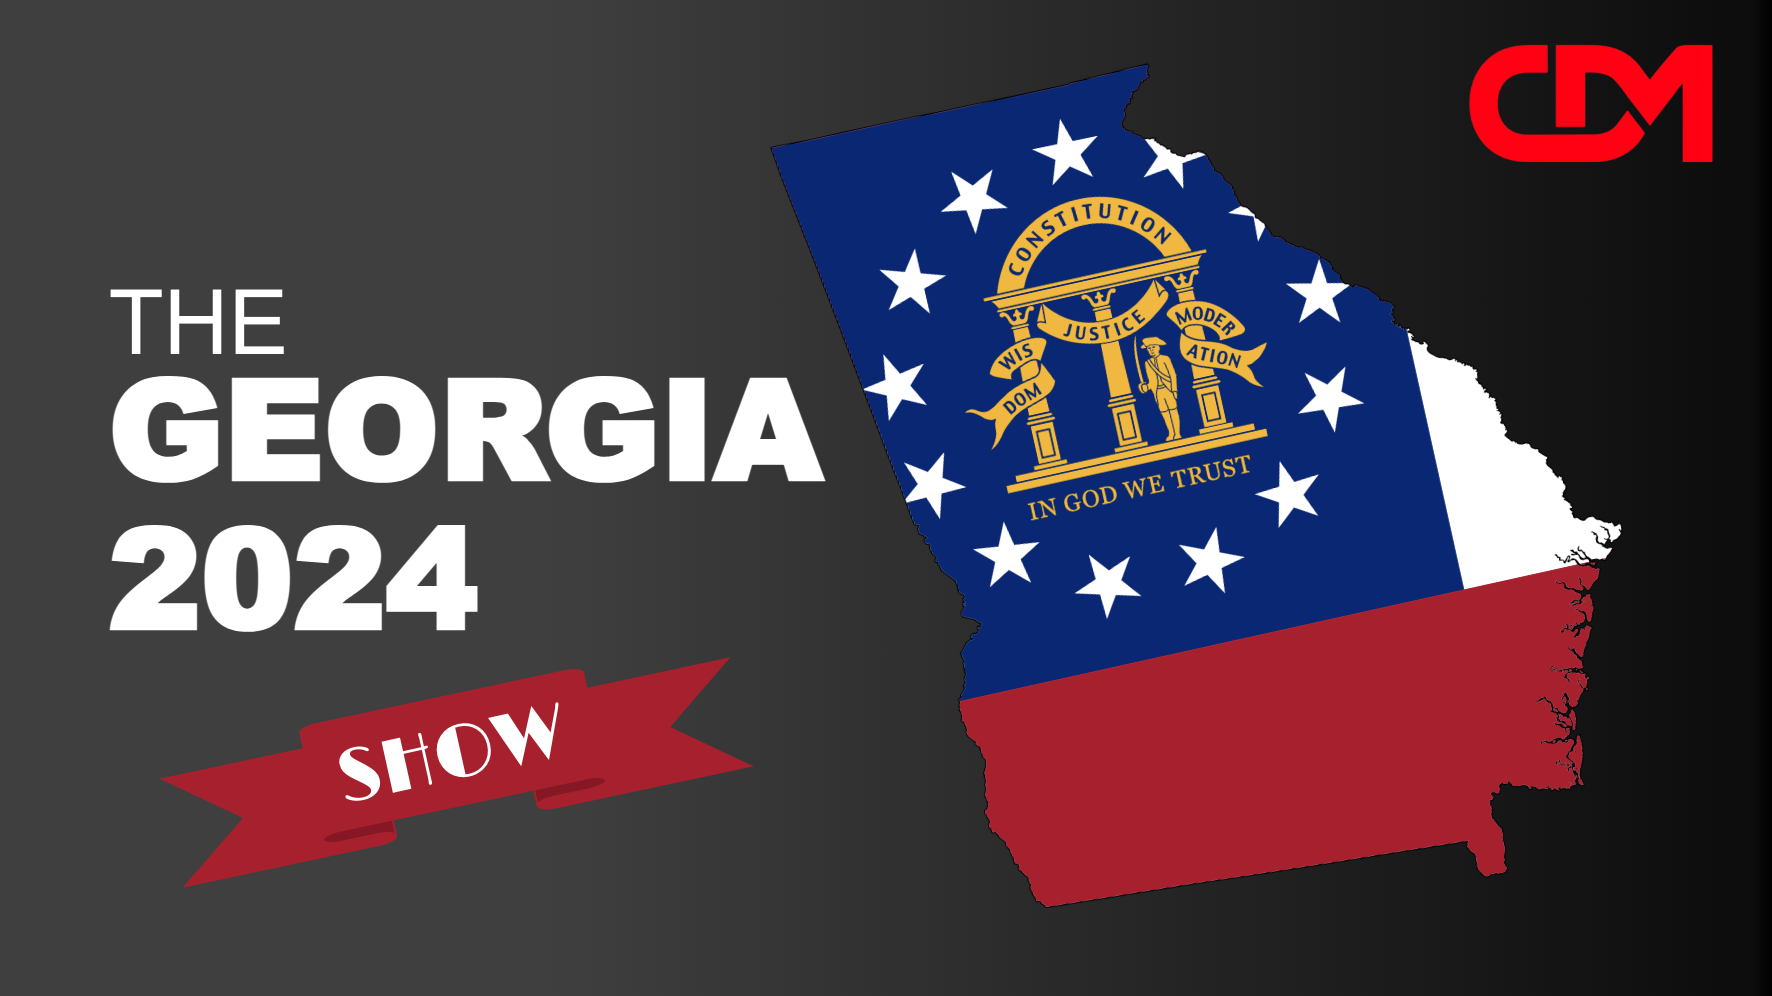 LIVESTREAM 2pm EST: The Georgia 2024 Show! With Chris Gleason, David Clements, Discussion Fulton County